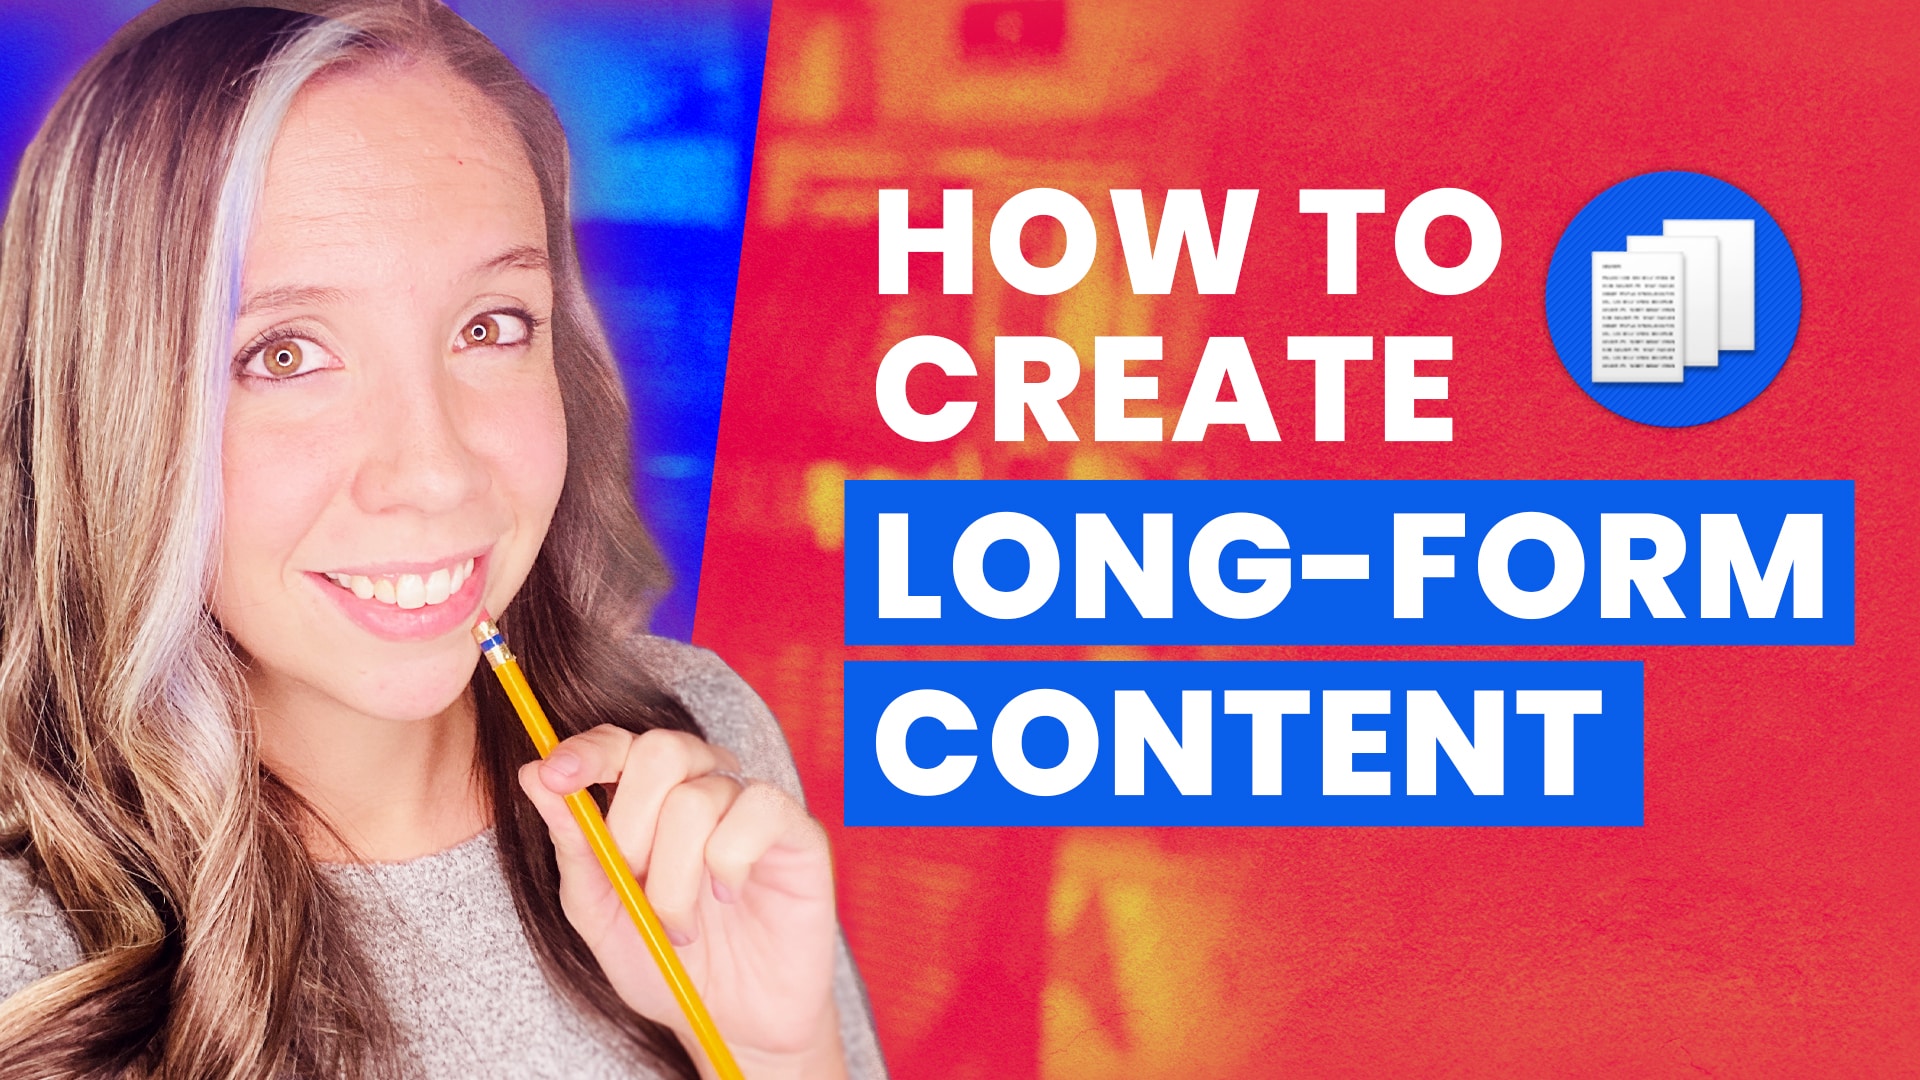 how to create long-form content